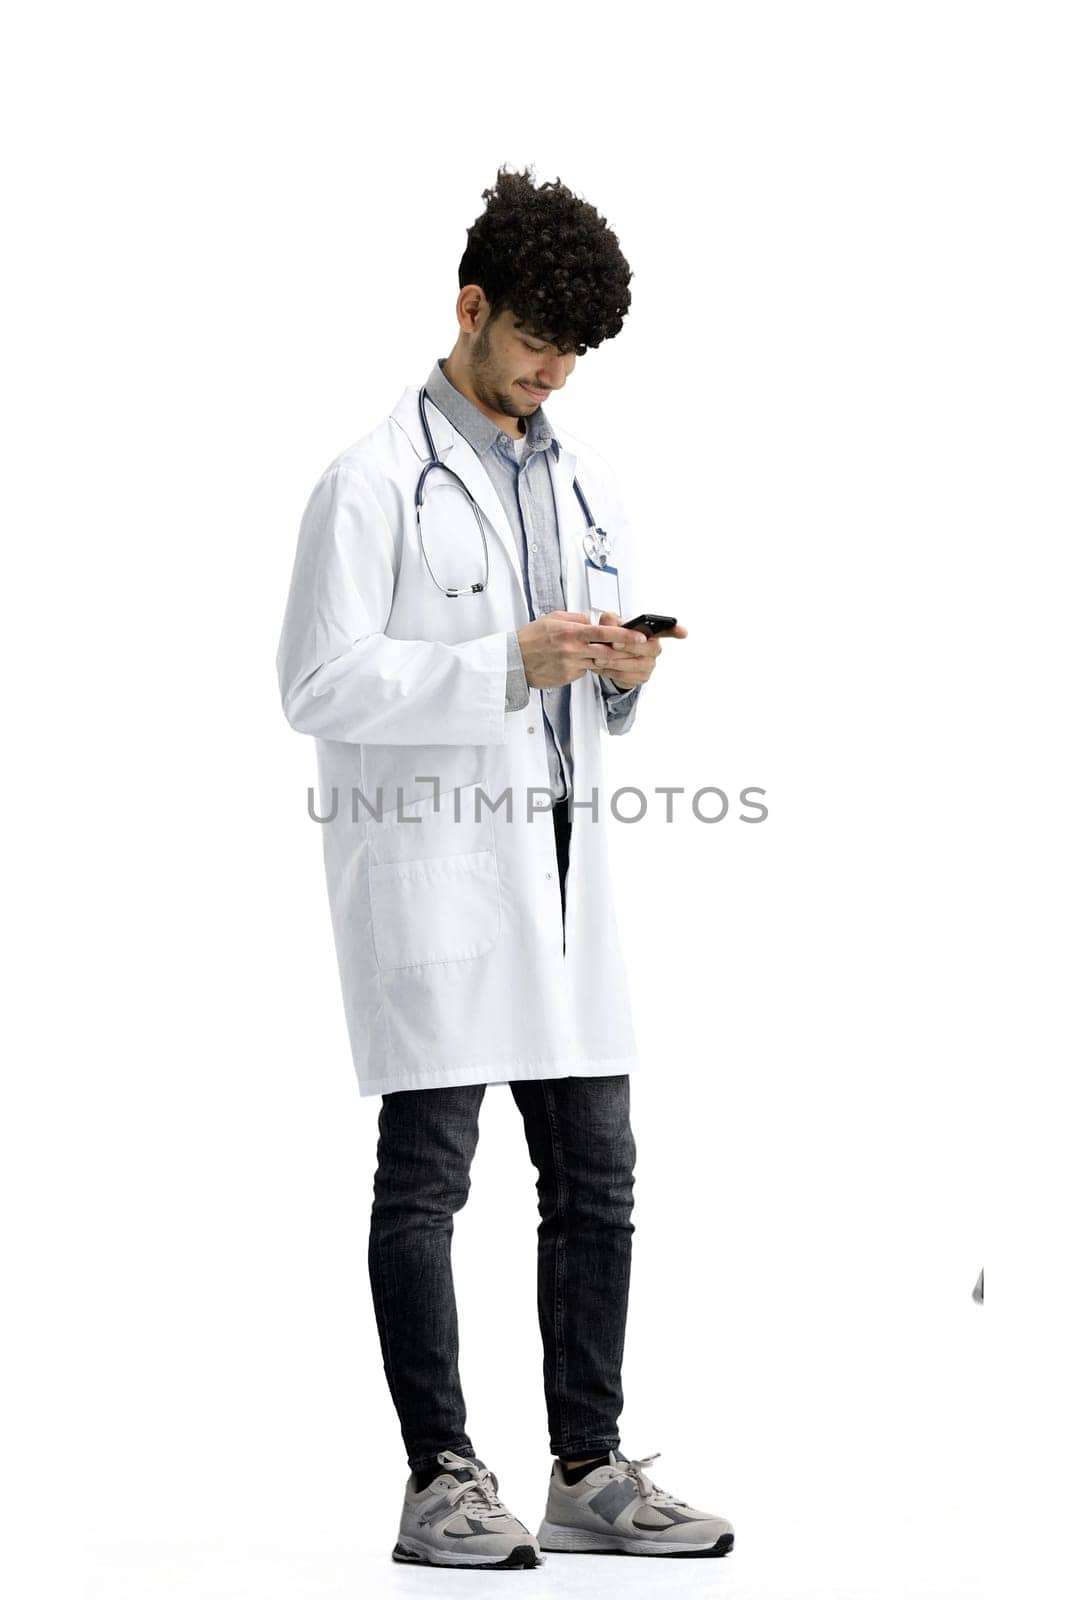 Male doctor, on a white background, full-length, with a phone.